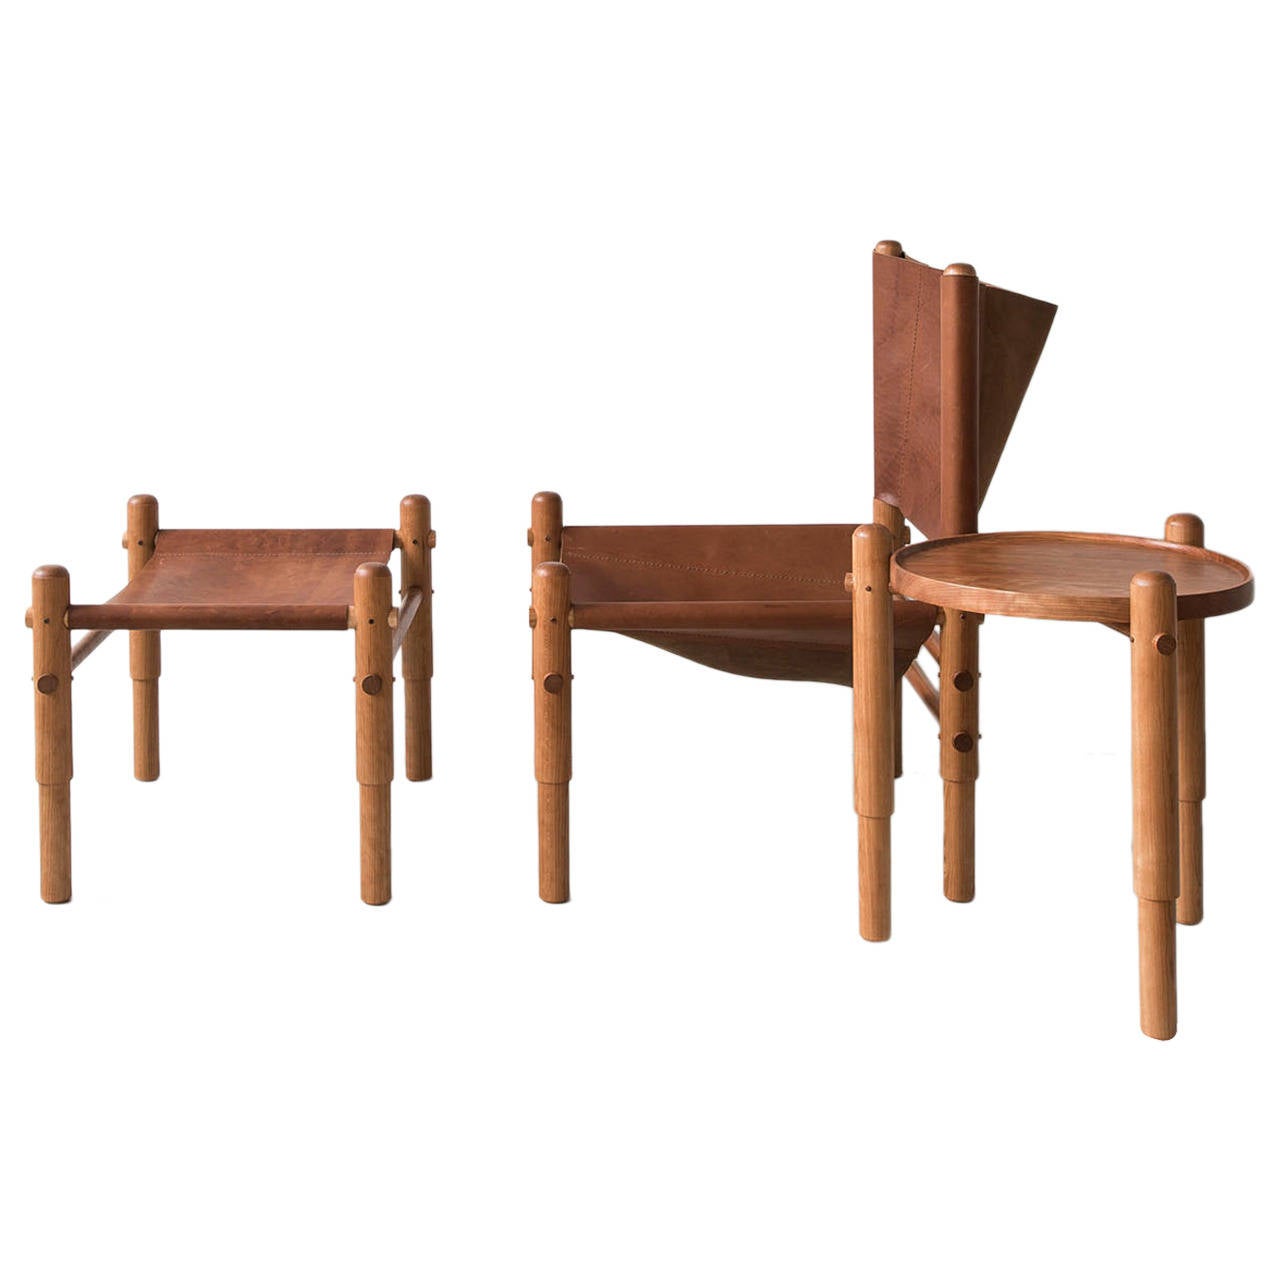 Workstead sling chair and ottoman, 2014